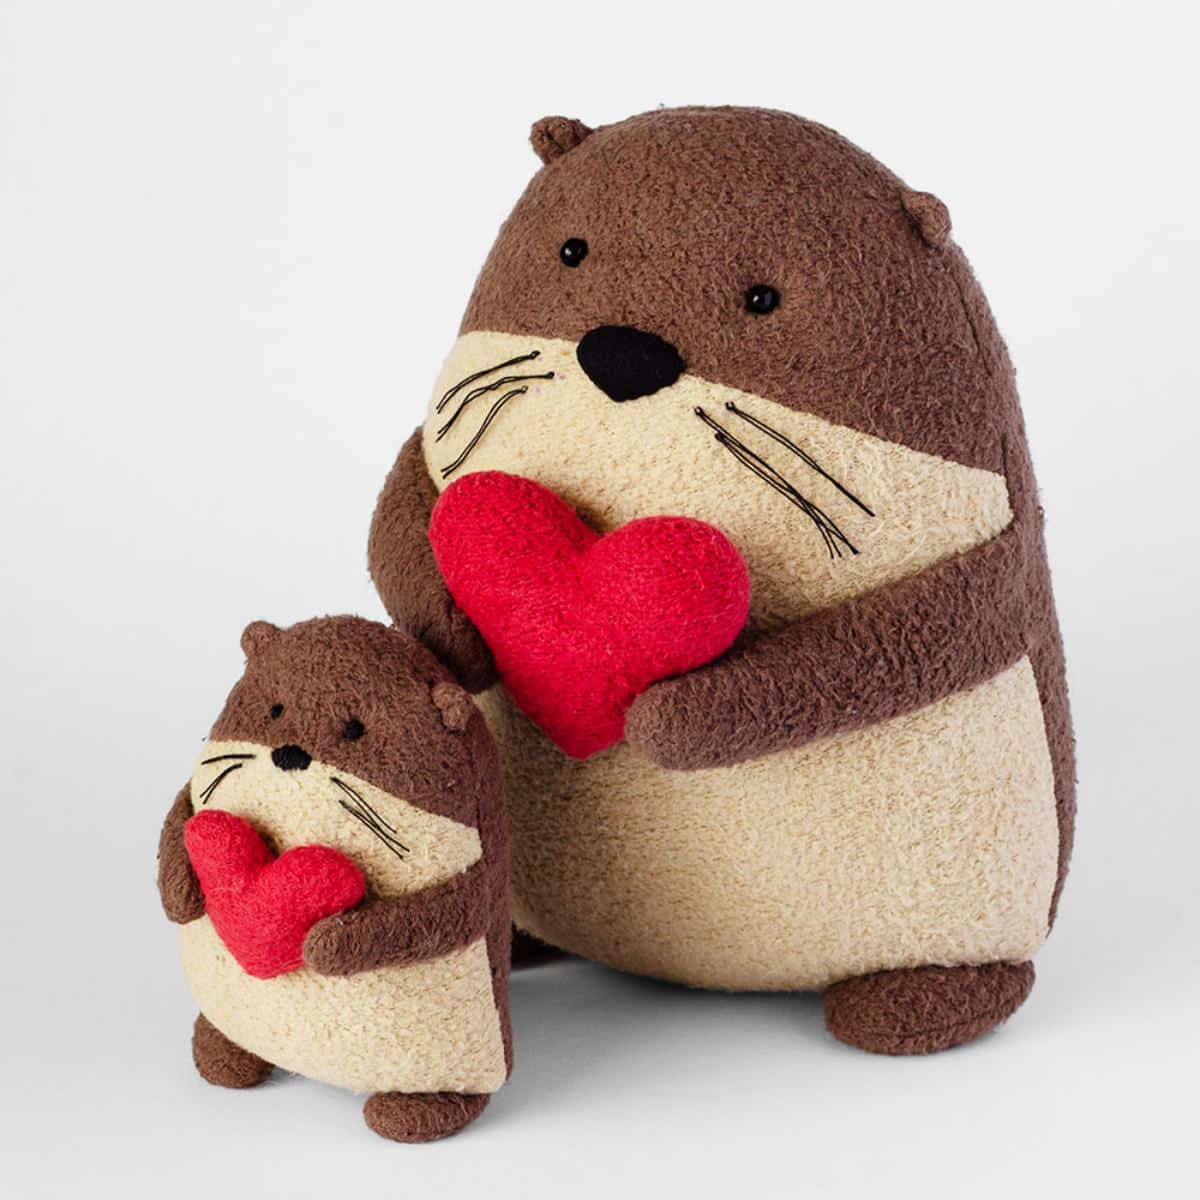 Squeakers the Otter plush toys.